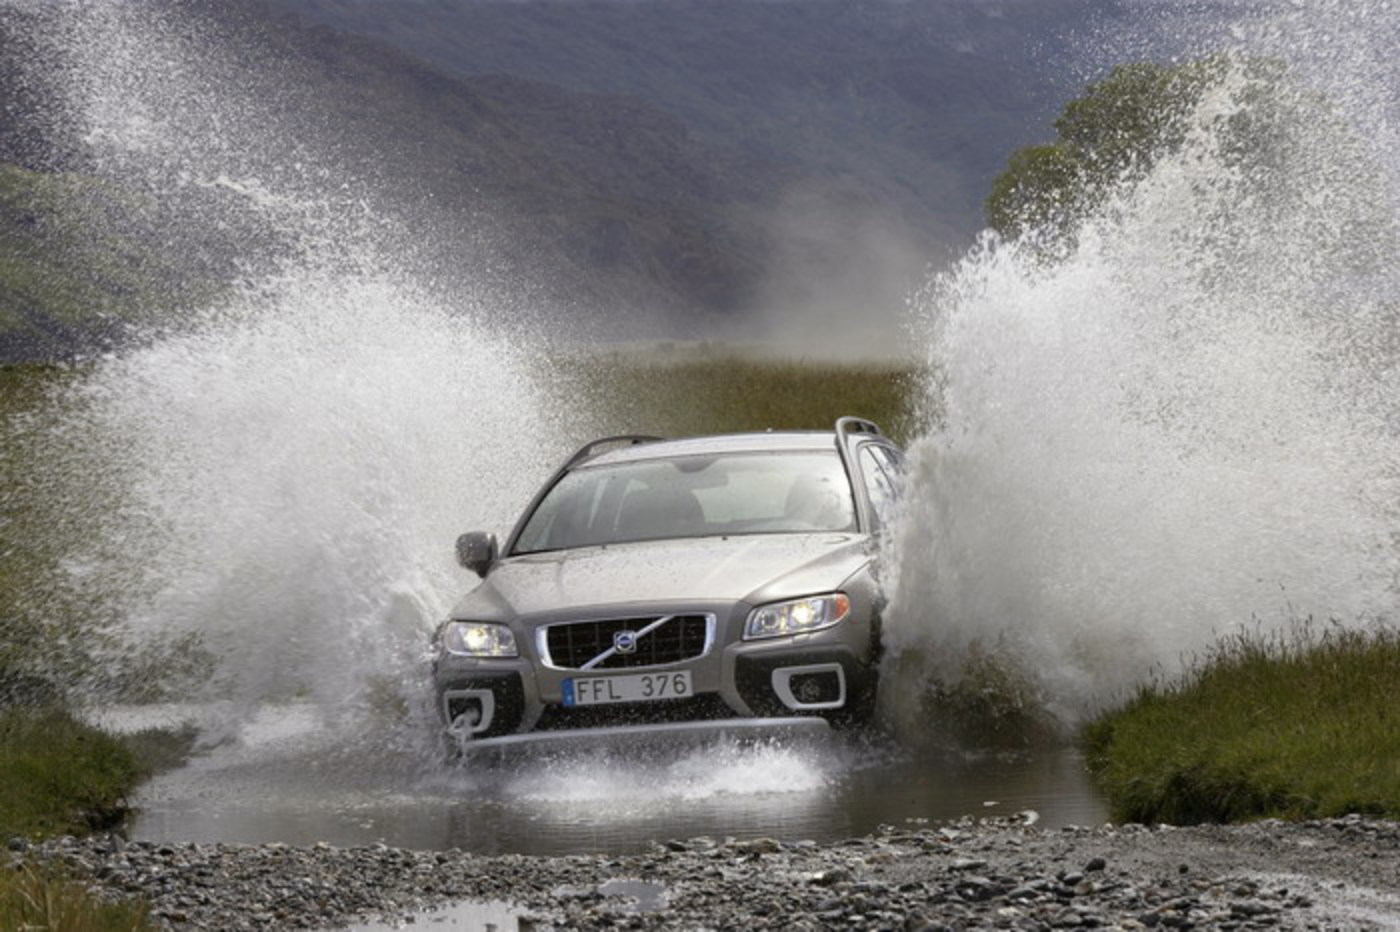 Volvo XC 70 32. View Download Wallpaper. 700x466. Comments